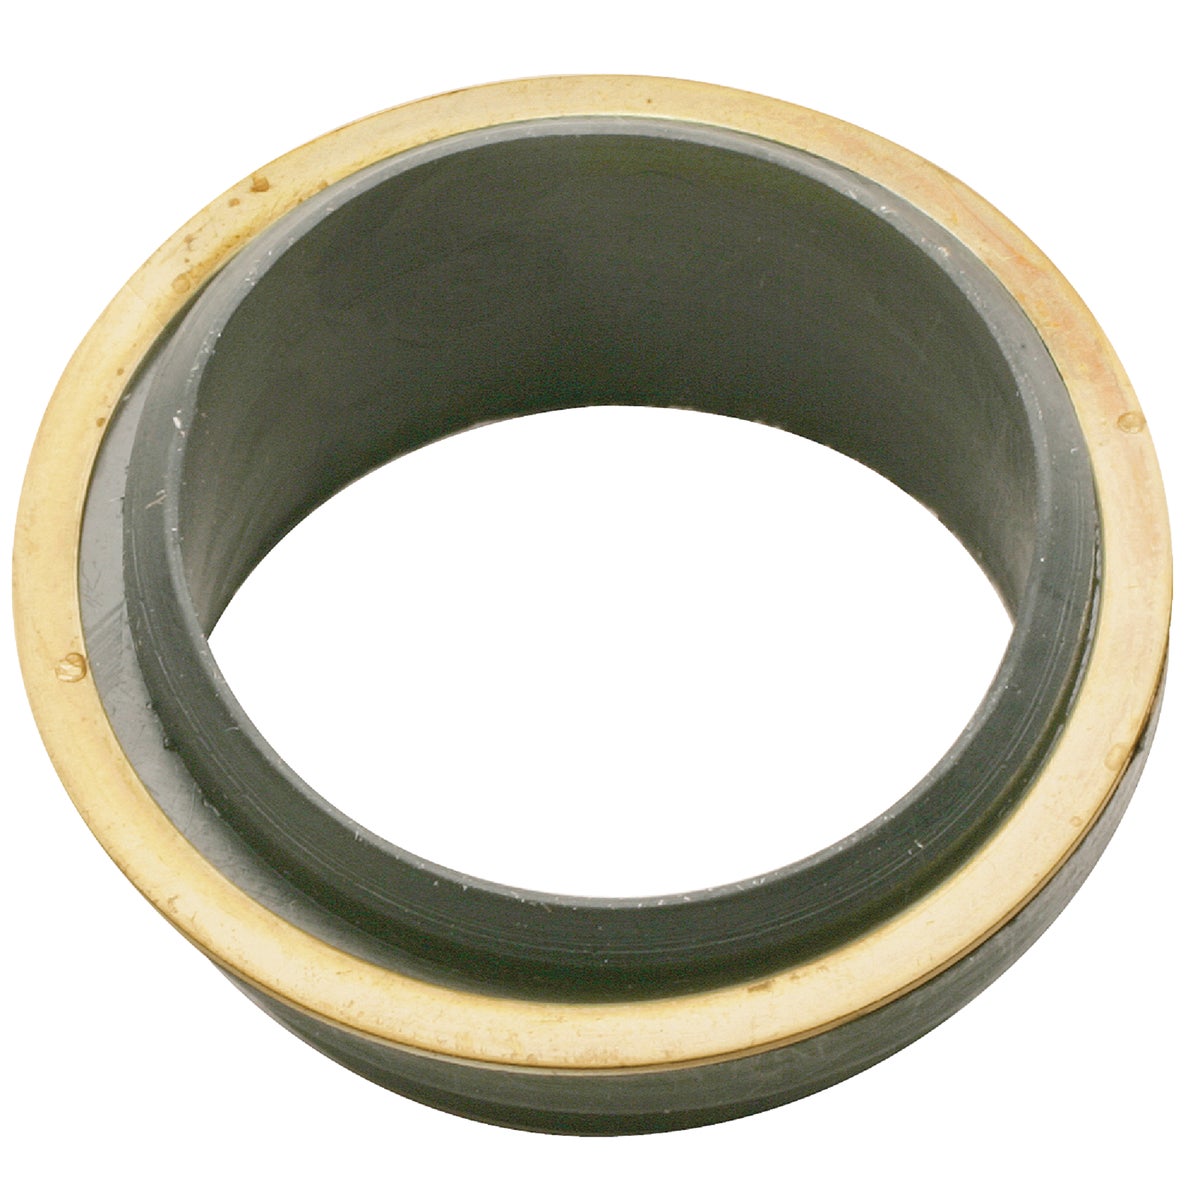 Item 445630, For Waste King garbage disposals. Includes friction ring.